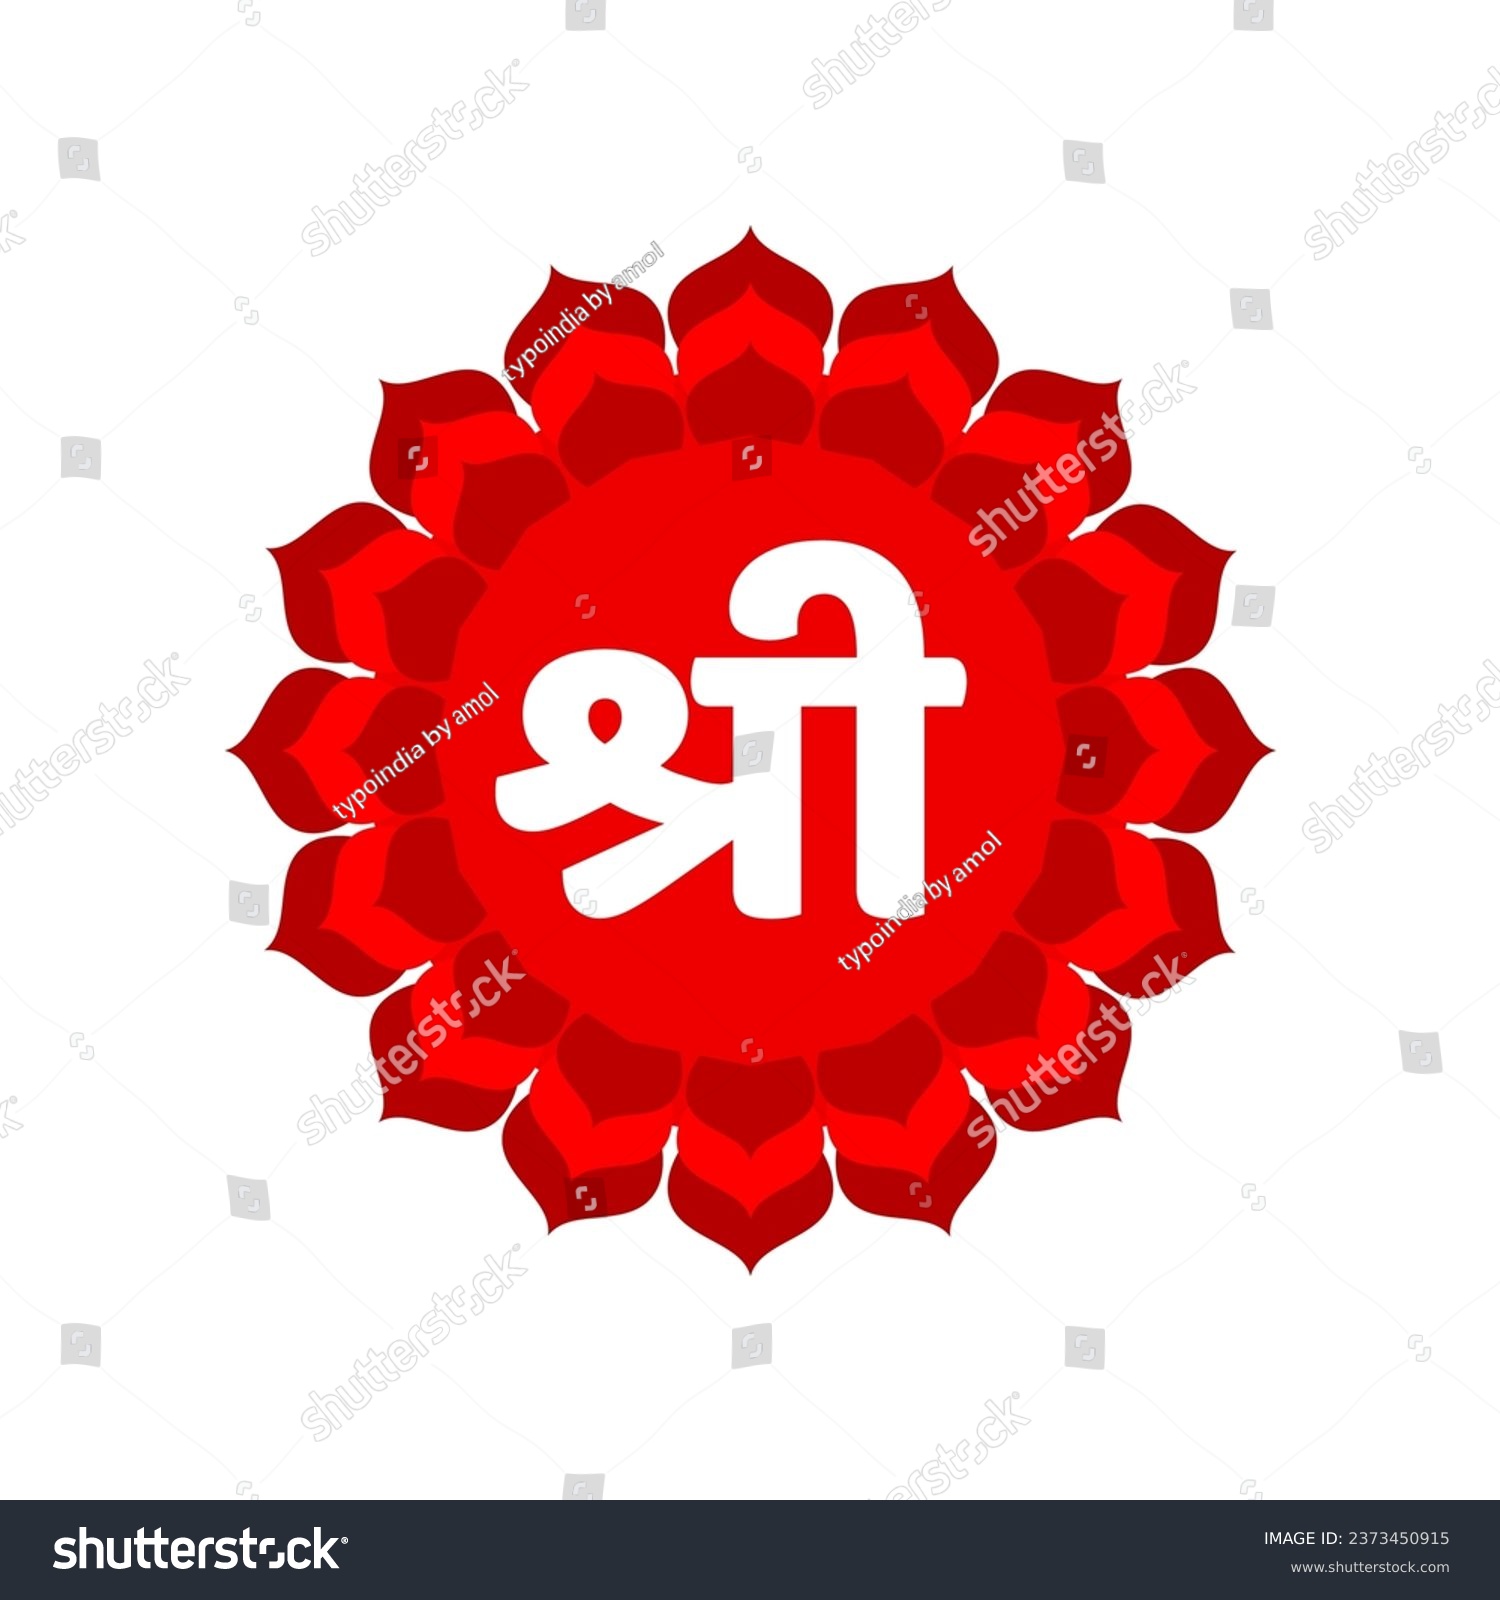 SVG of Shri written Devanagari calligraphy that means Lord Ganesh name with red lotus icon. svg